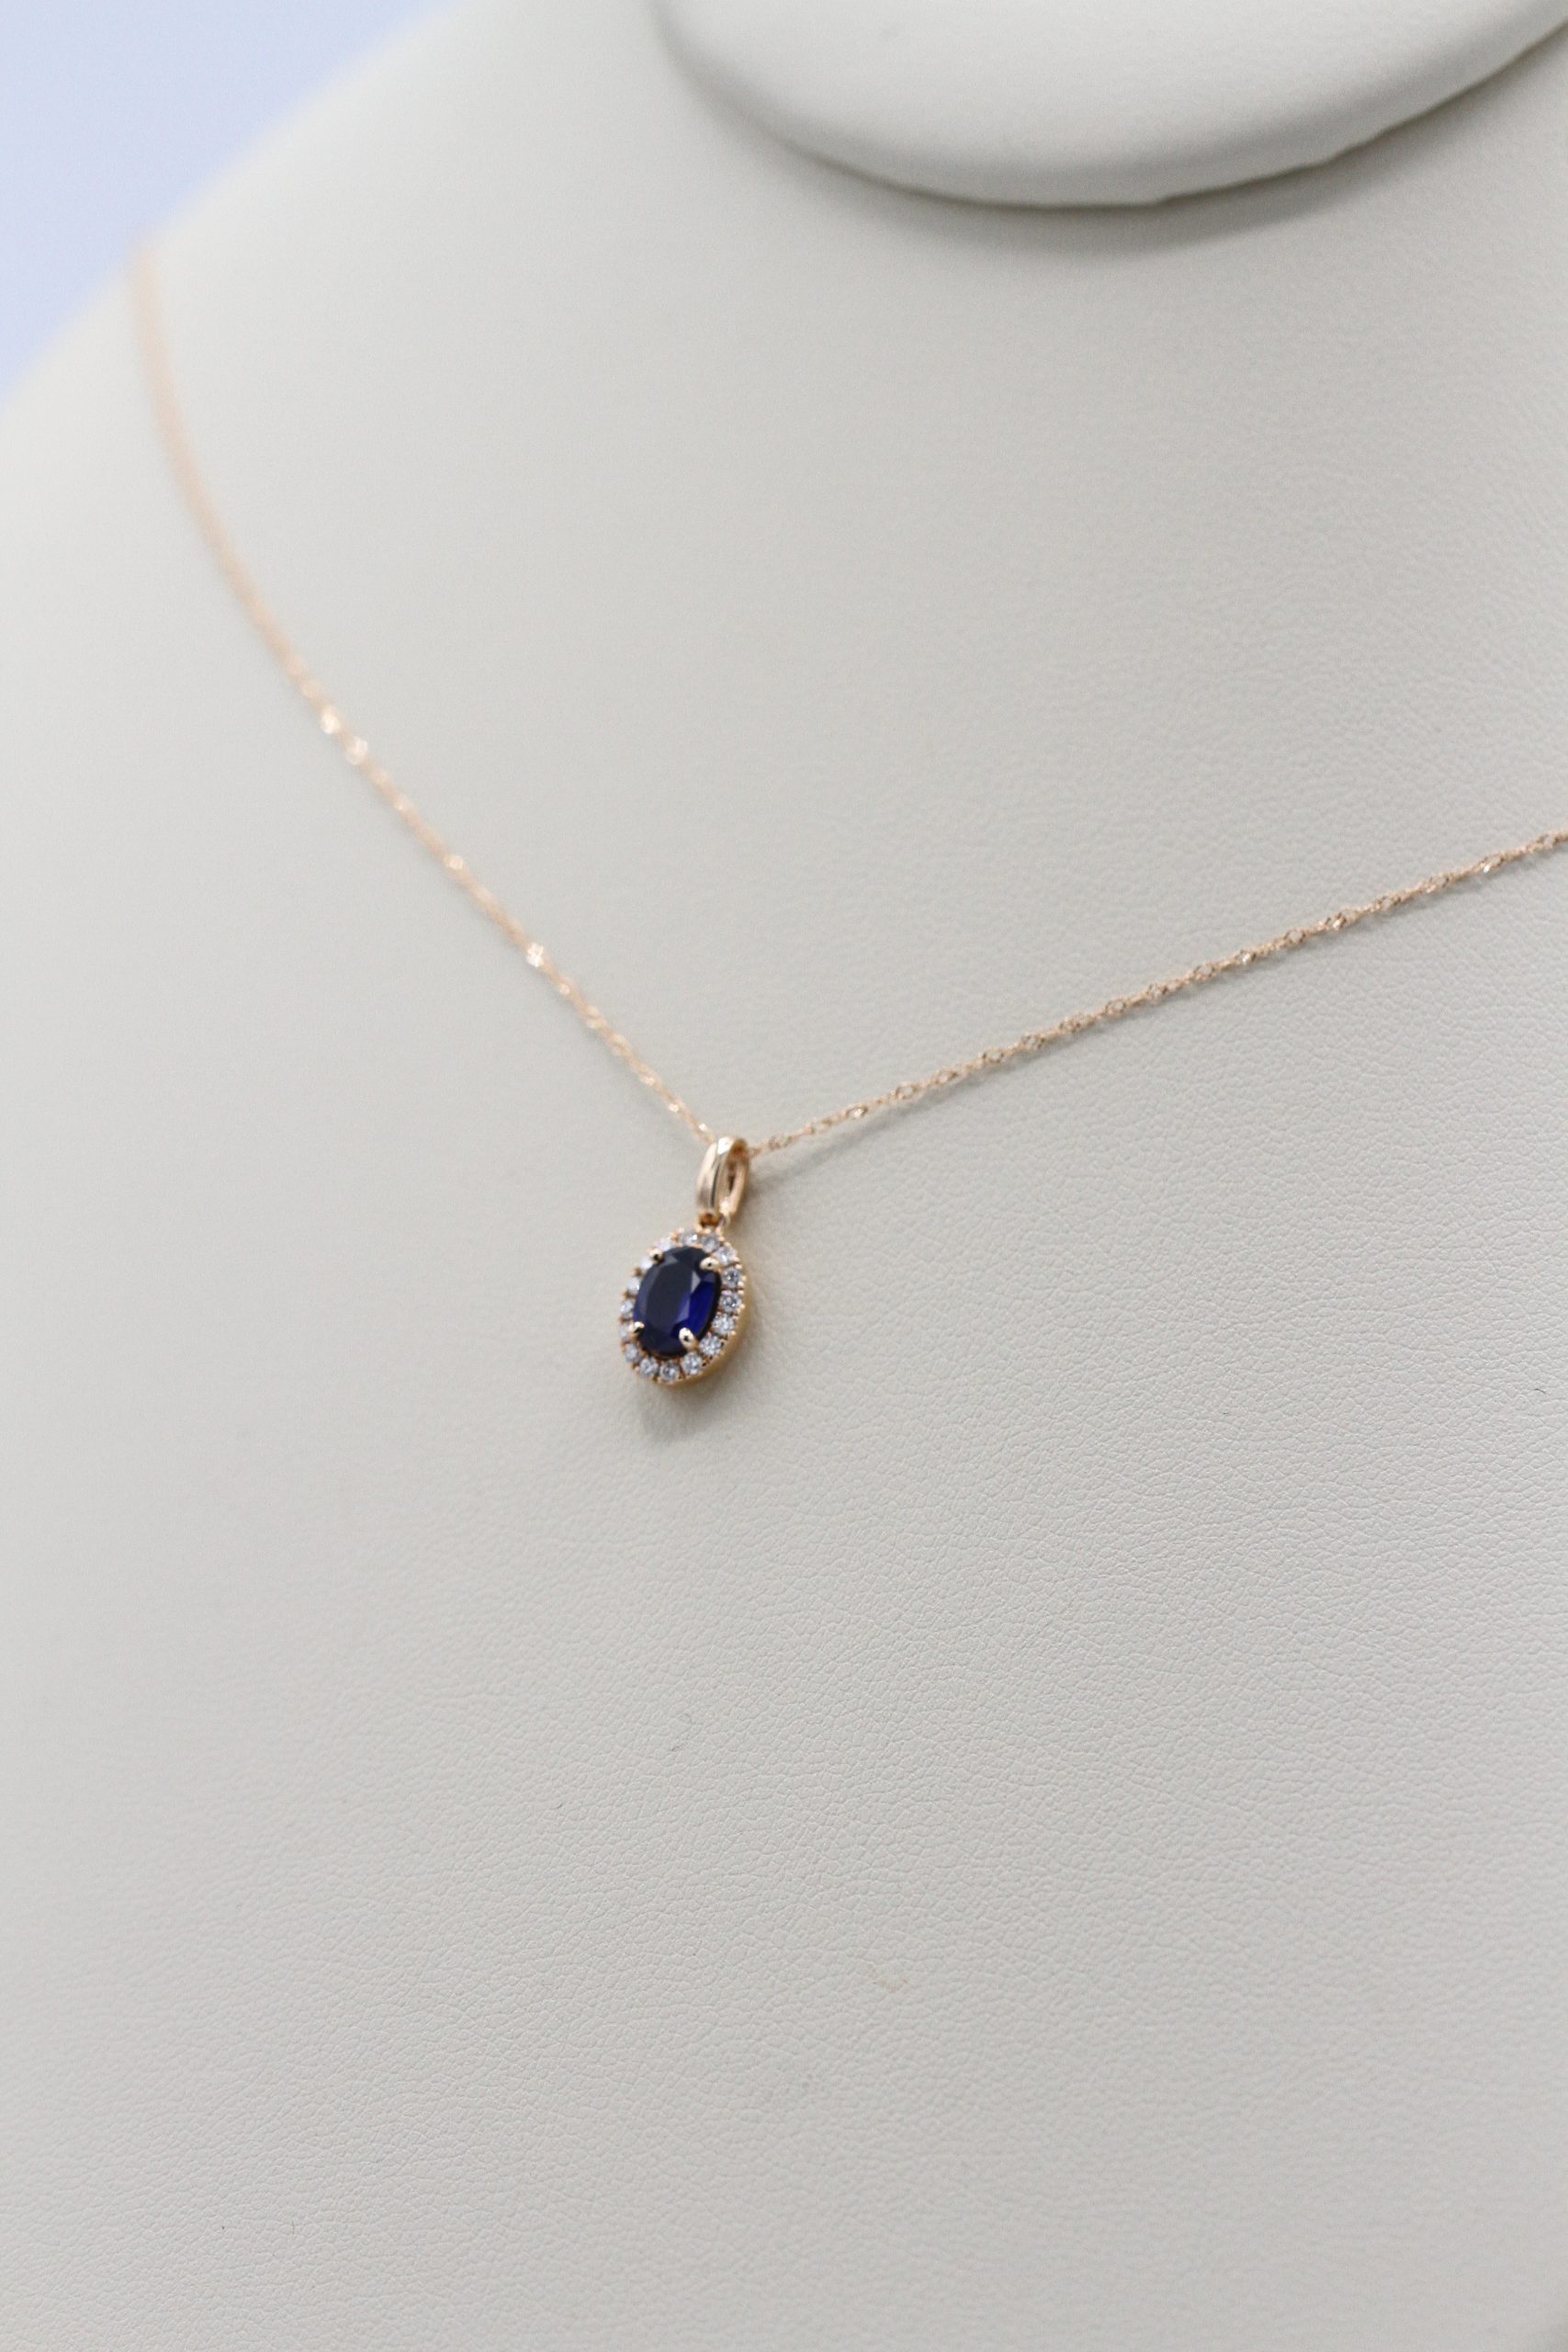 A necklace with a small blue stone and surrounding diamonds